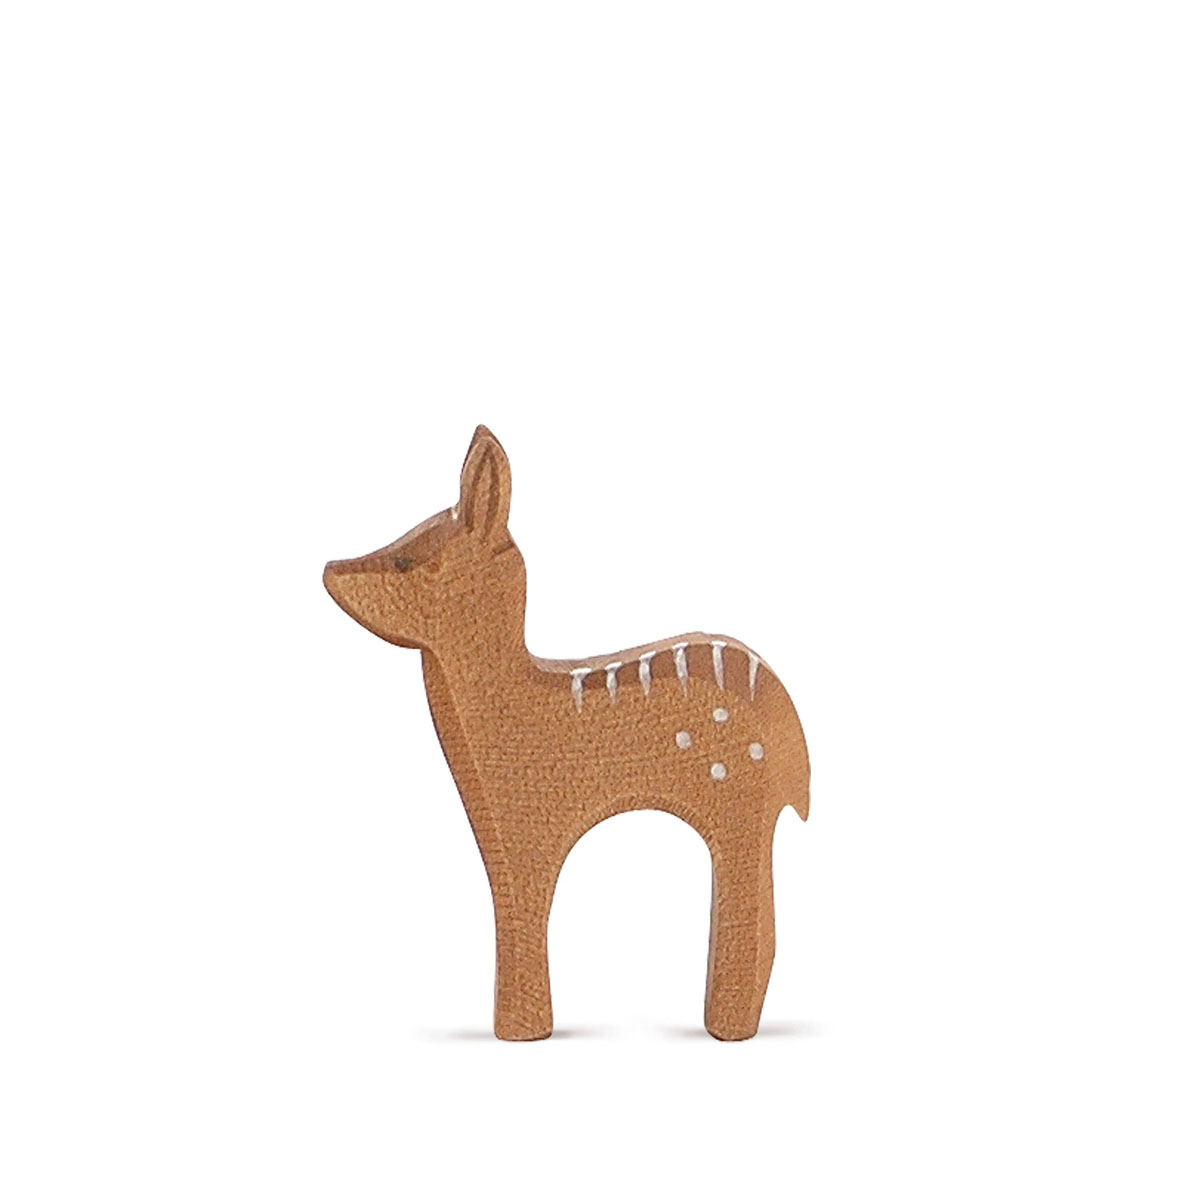 Fawn standing